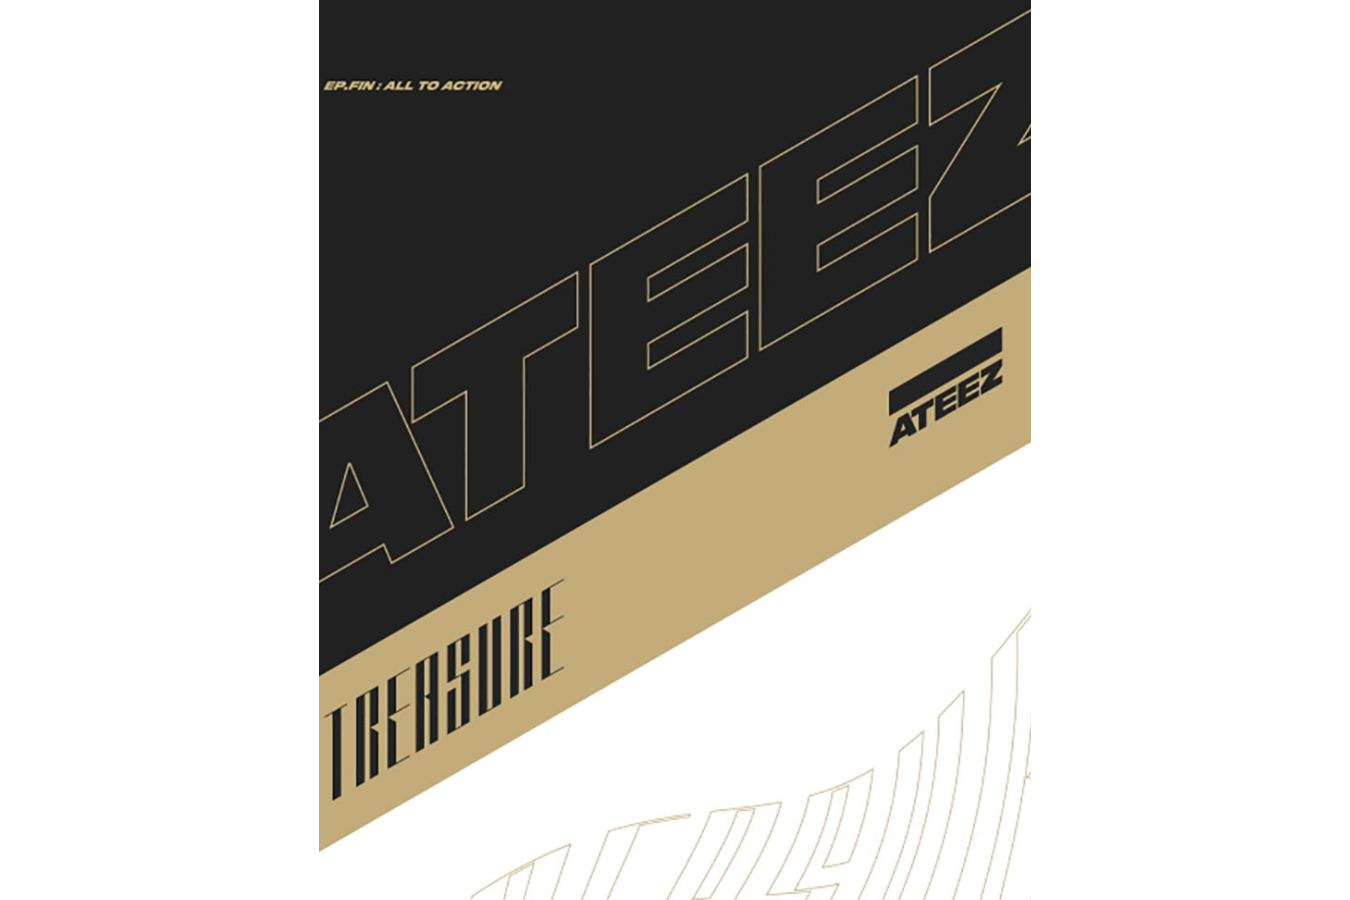 ATEEZ EP.FIN ALL TO ACTION